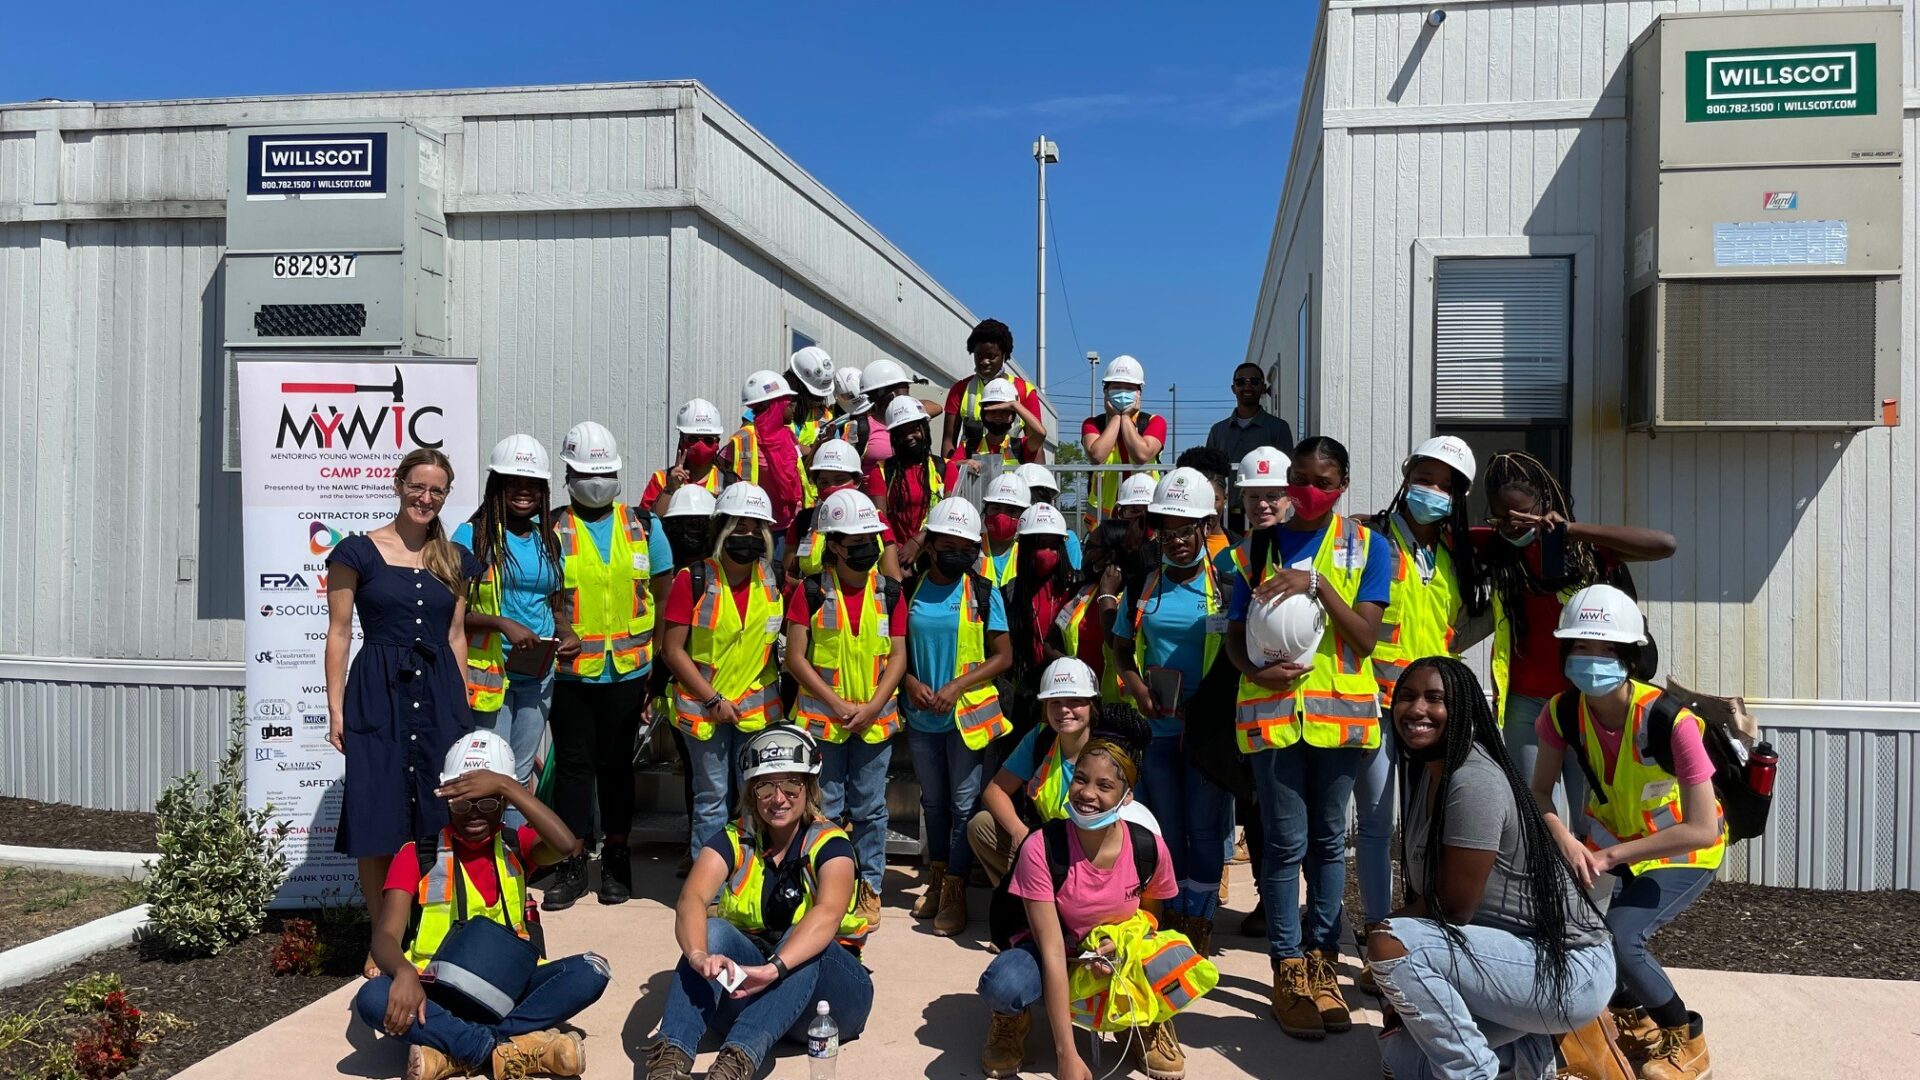 Group photo with people in construction gear